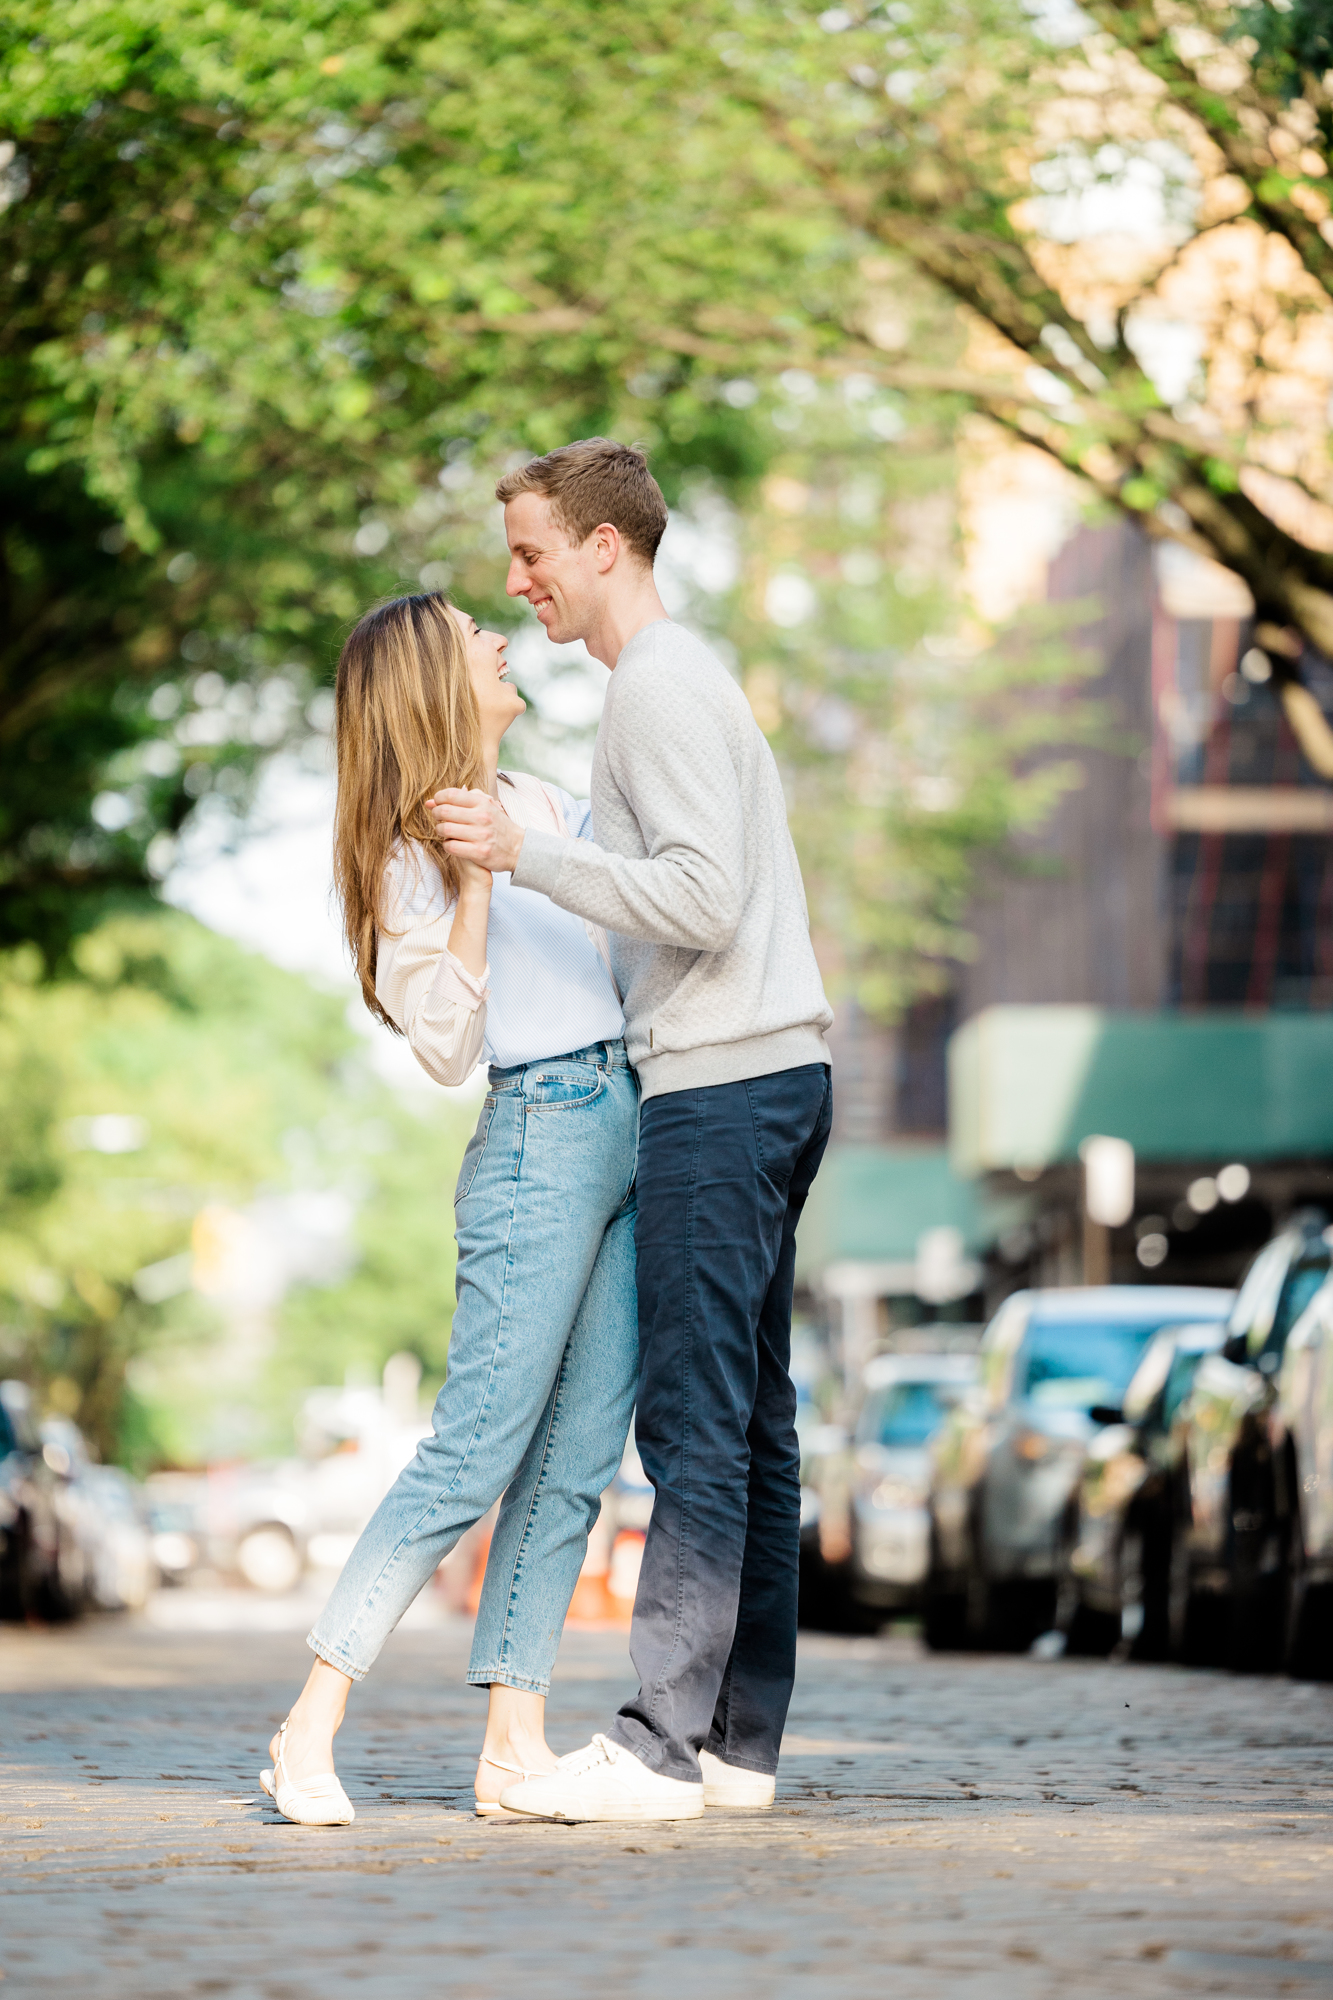 Playful Pose Ideas for your Engagement Session